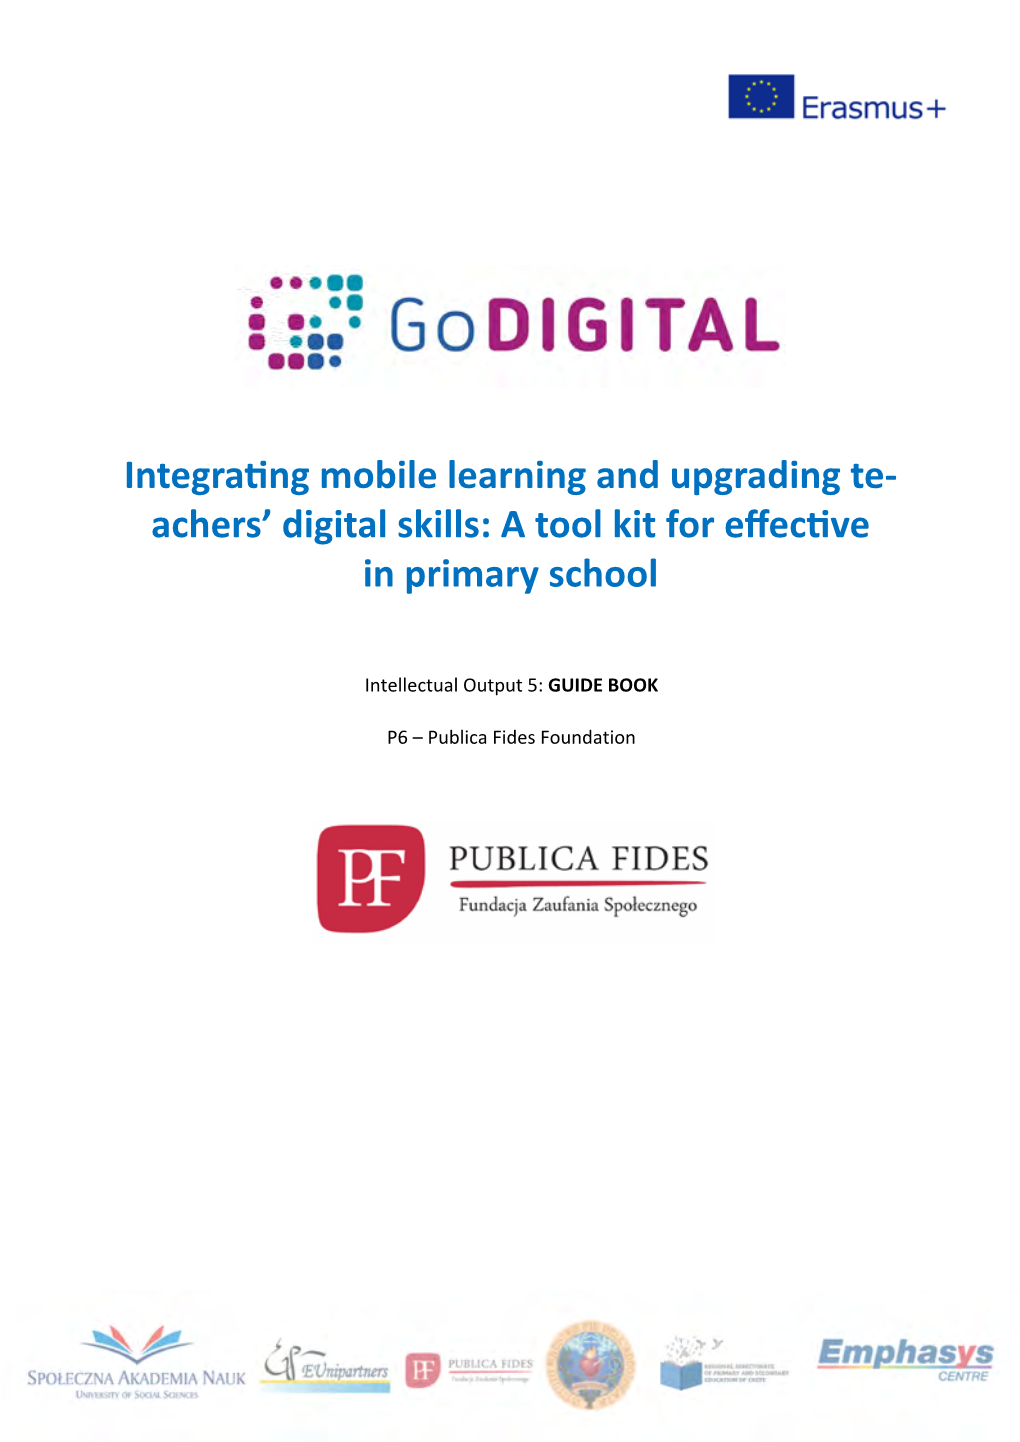 Integrating Mobile Learning and Upgrading Te- Achers’ Digital Skills: a Tool Kit for Effective in Primary School